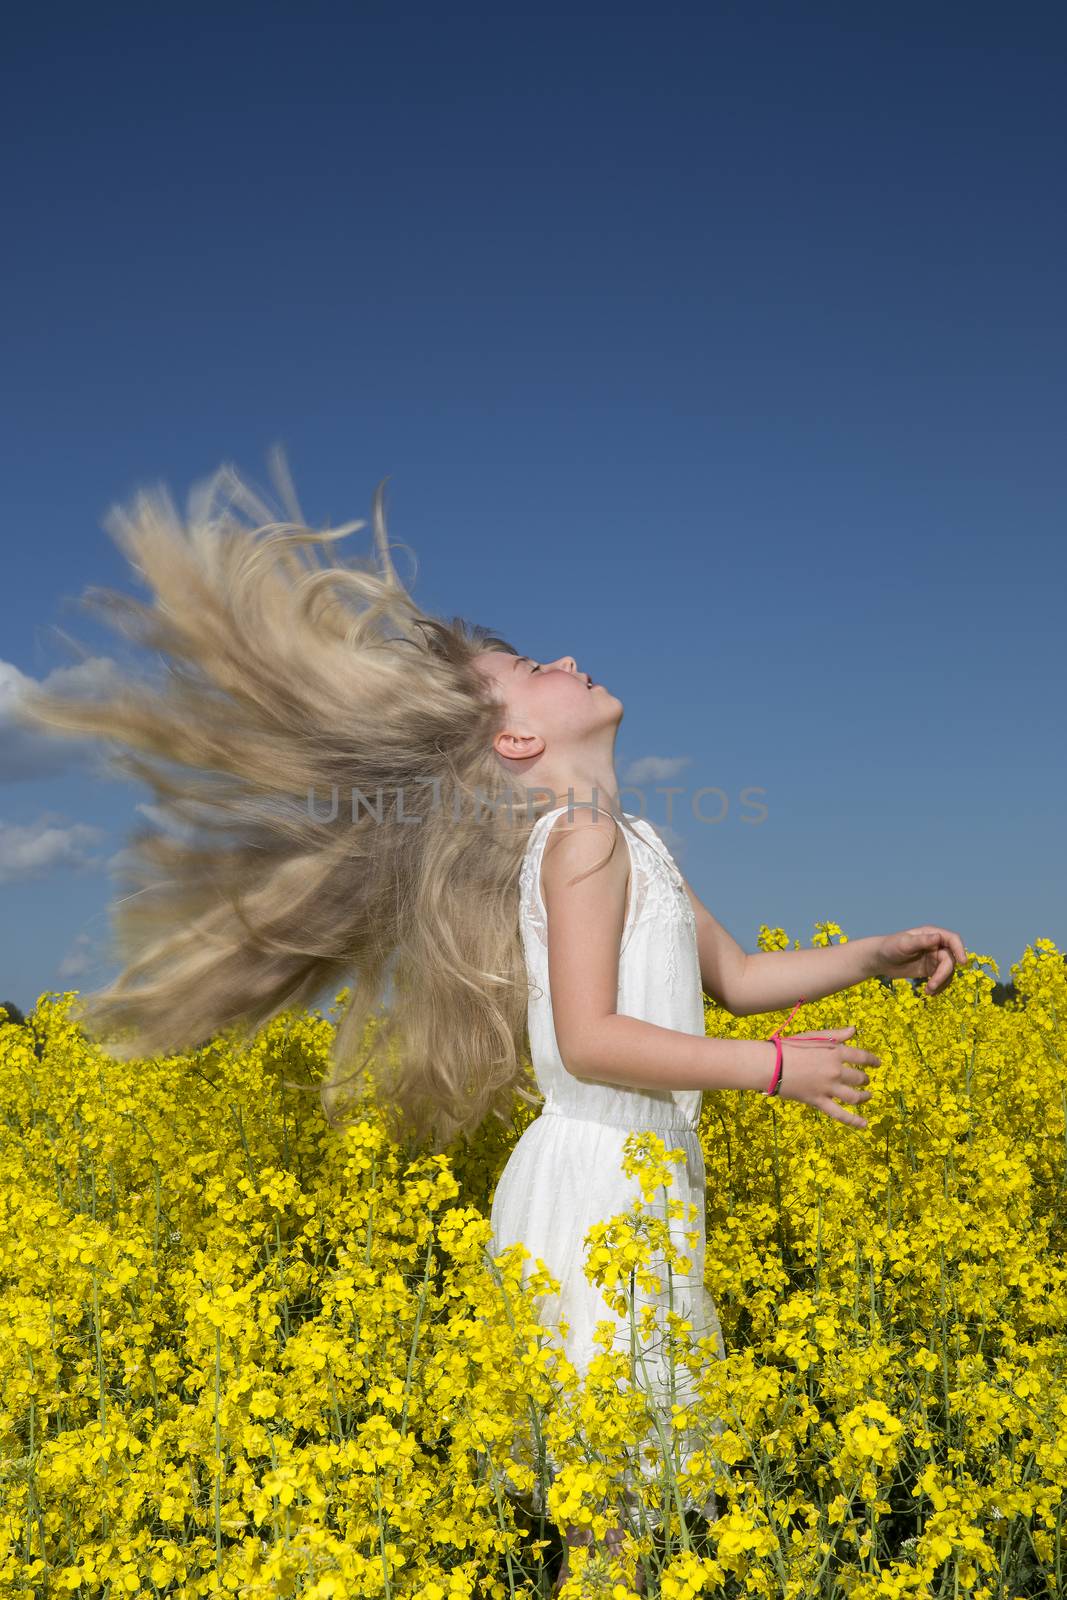 Young girl with Long Hair on a Rape Field